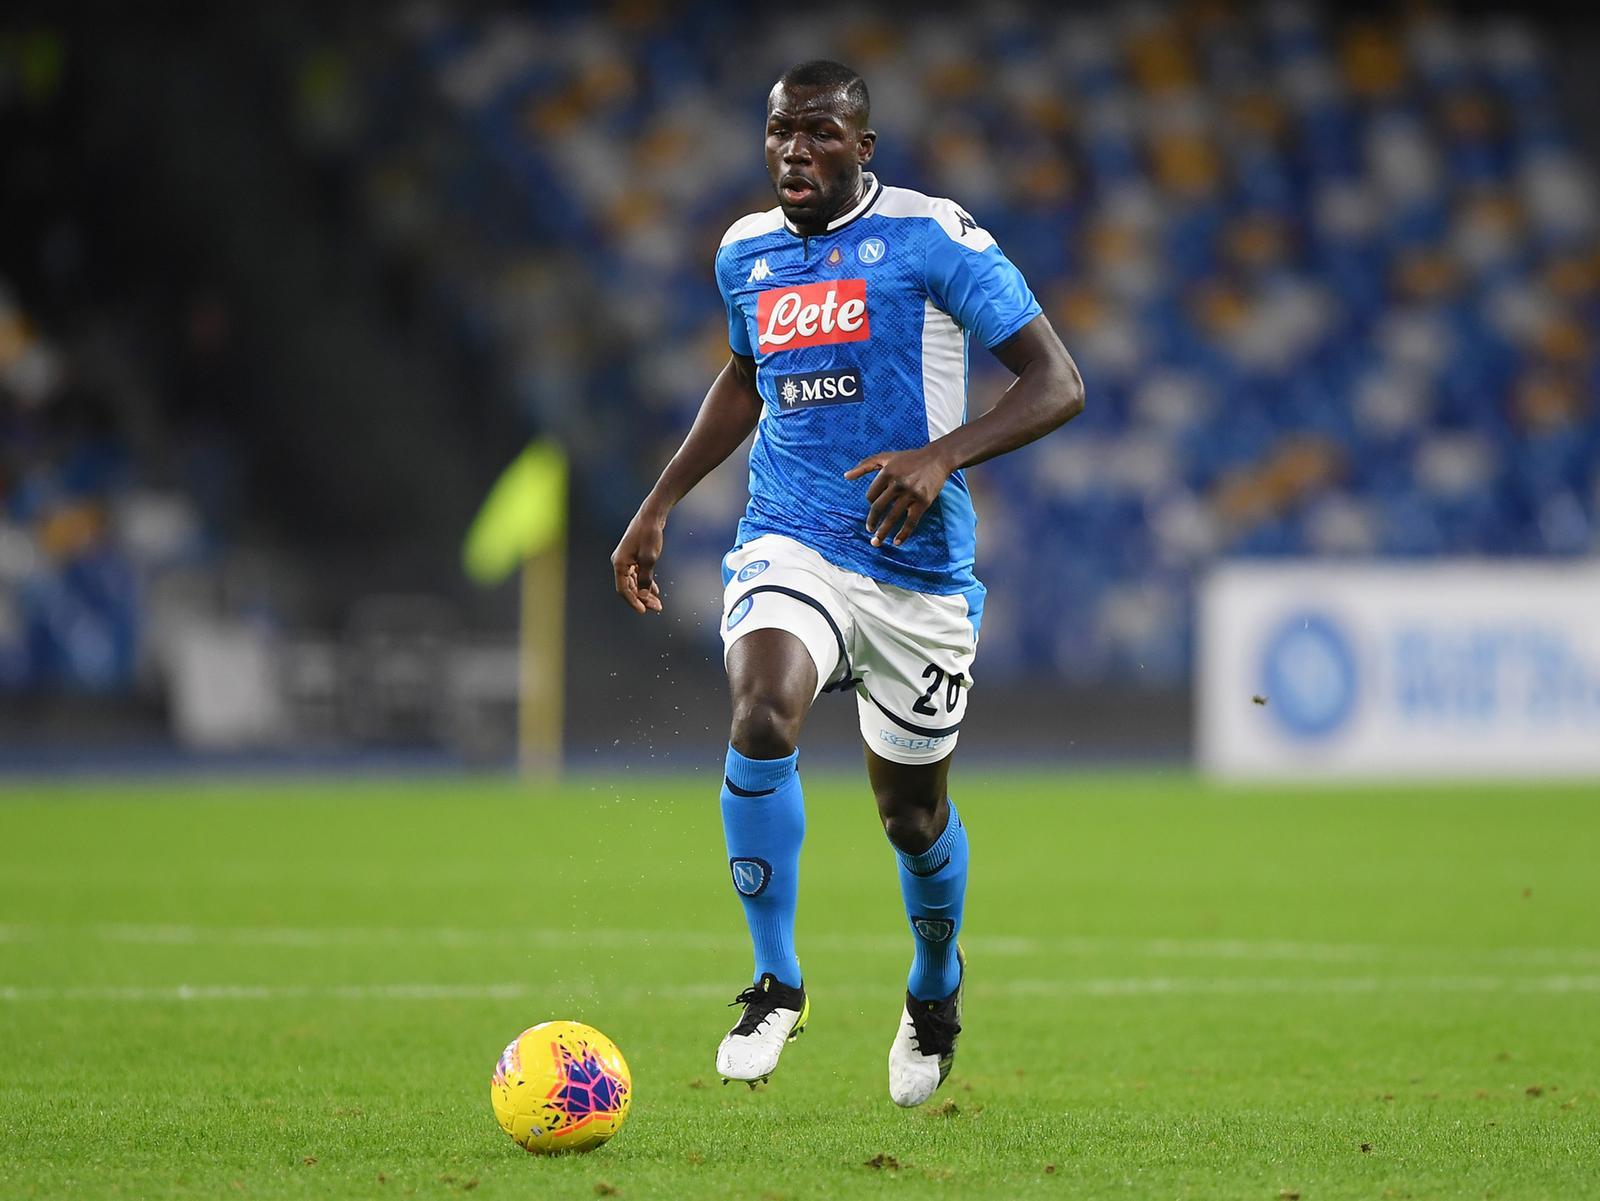 With his side struggling in Serie A, and Manchester City in desperate need of a centre-back, the Citizens may well launch a last ditch move to land the Senegalese sensation.